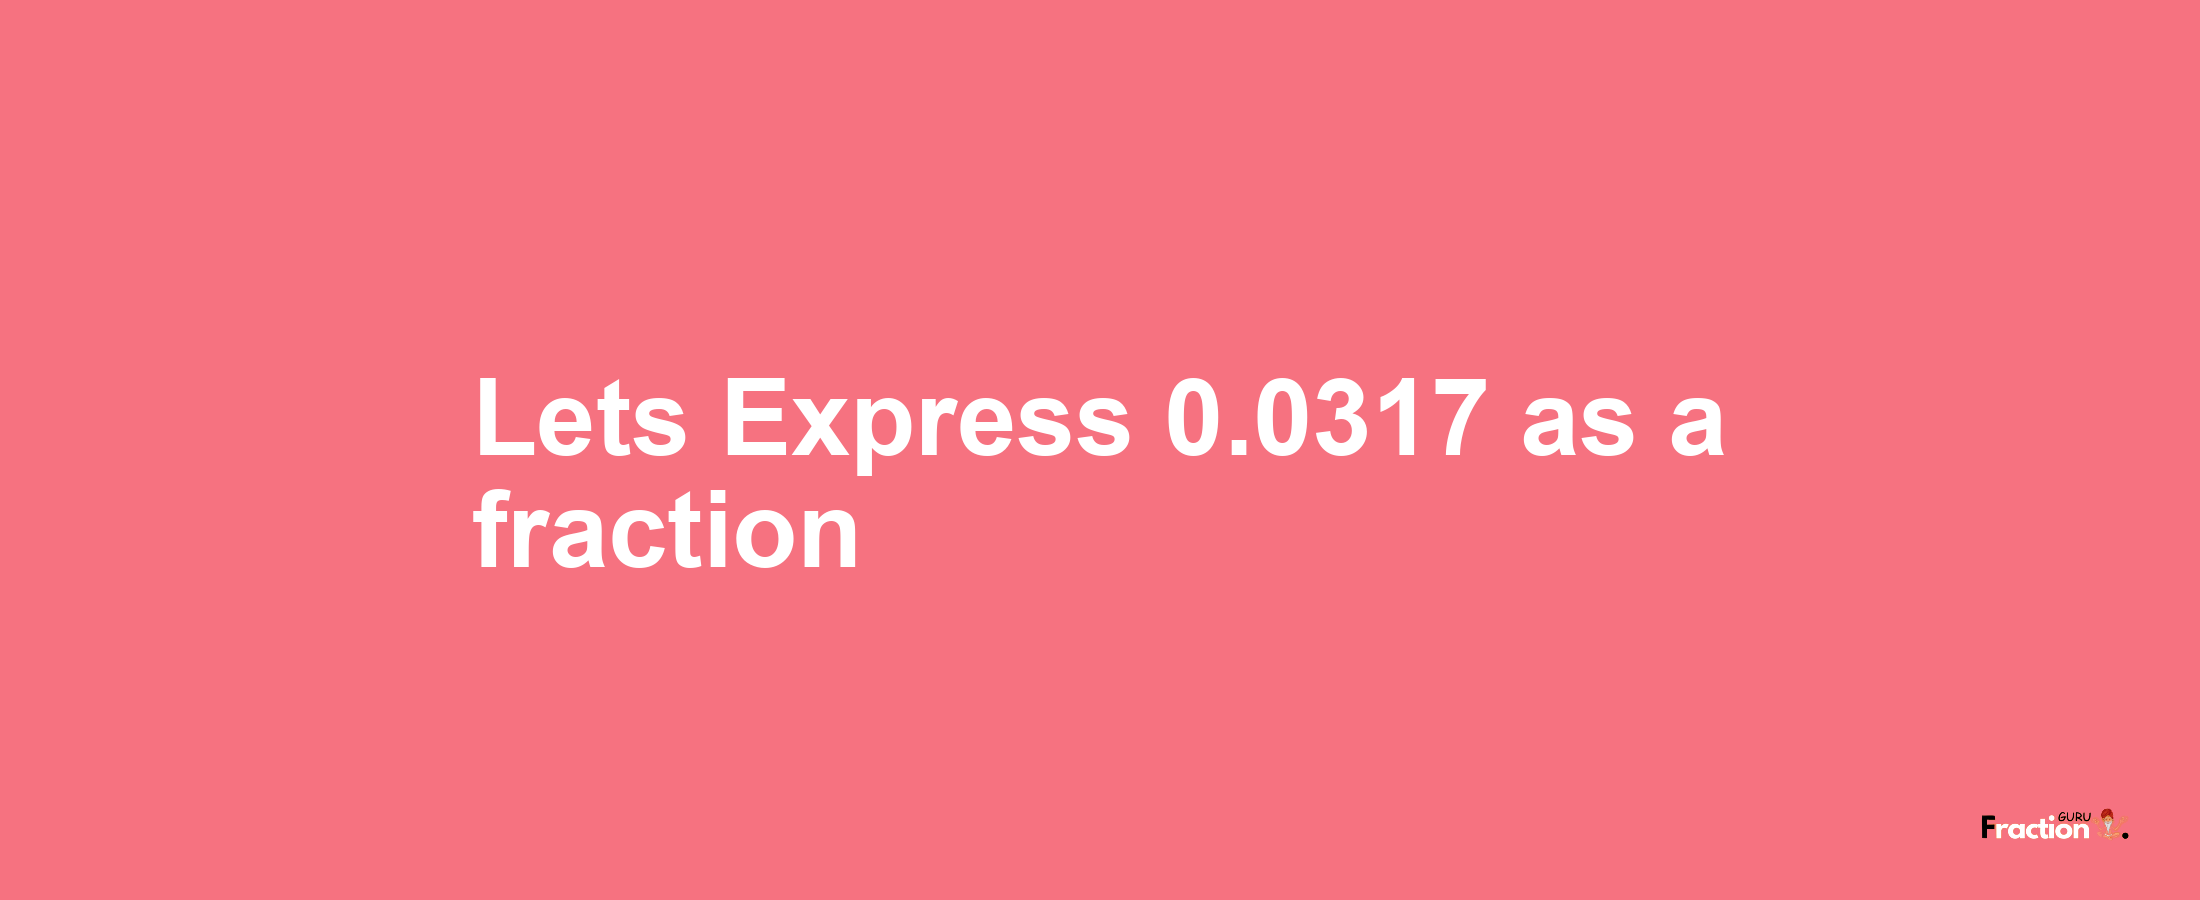 Lets Express 0.0317 as afraction